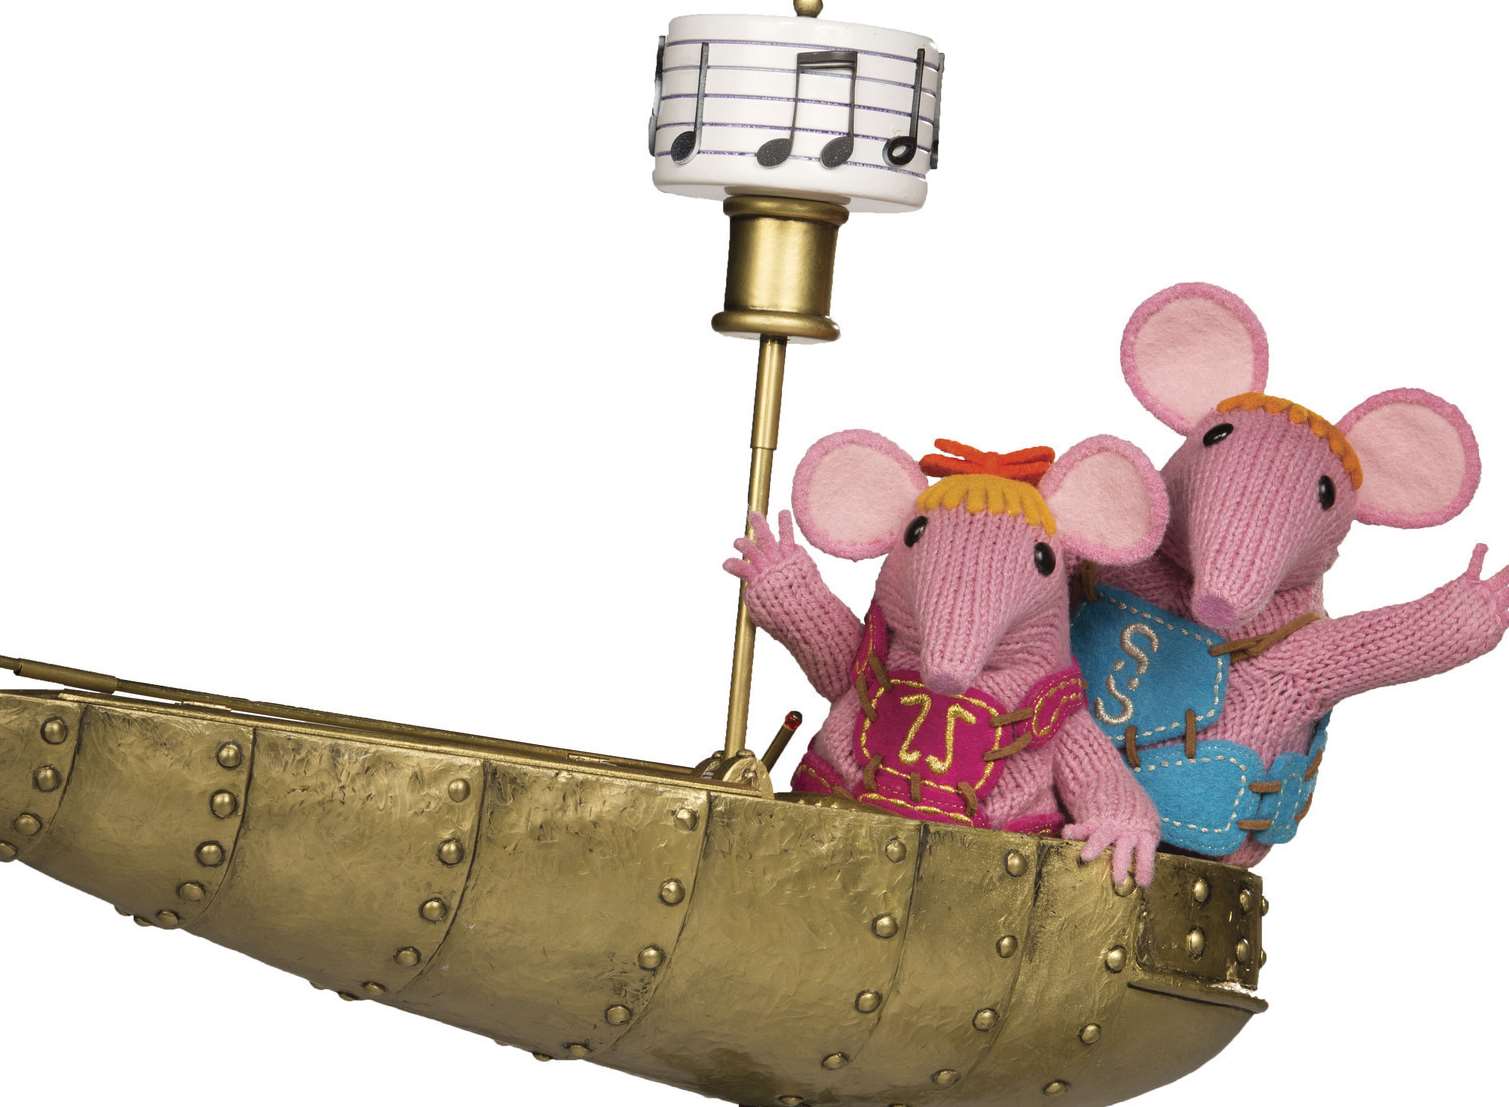 The new Clangers. Picture: BBC/Jonathan Birch